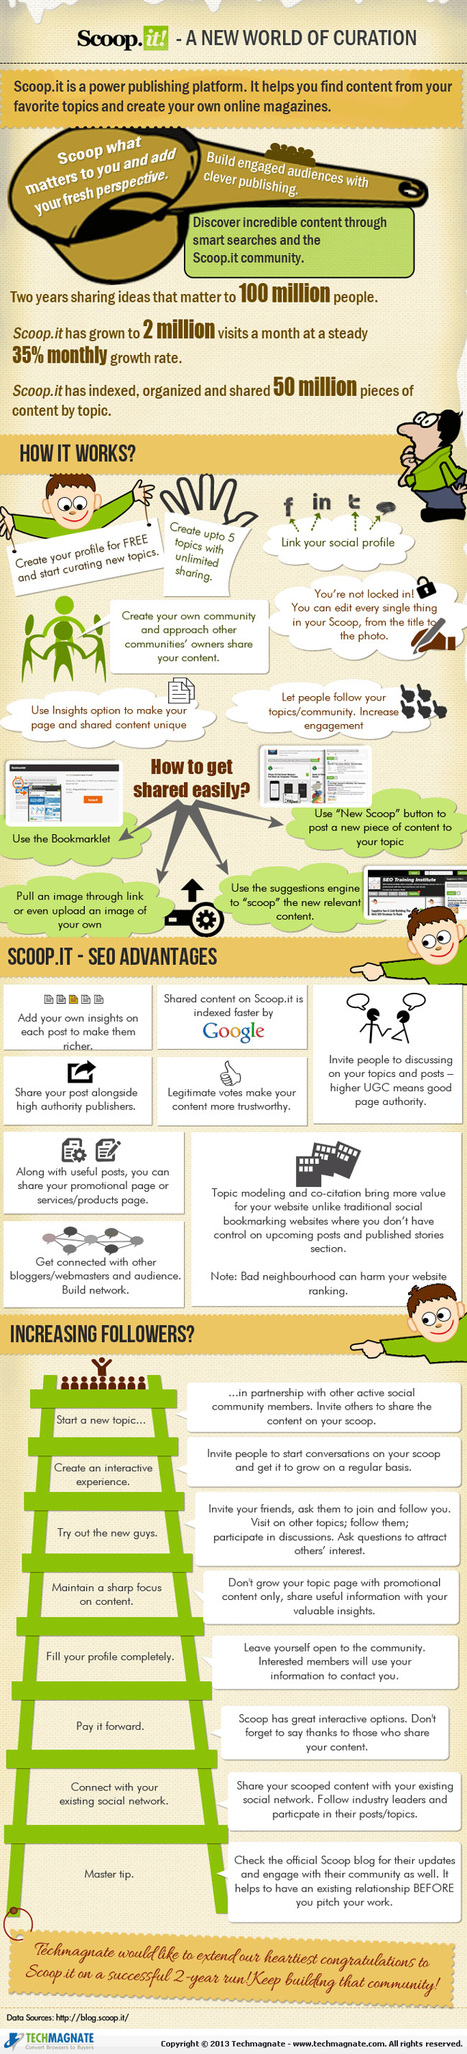 Scoop.It for SEO – A New World of Curation [Infographic] | MarketingHits | Scoop.it